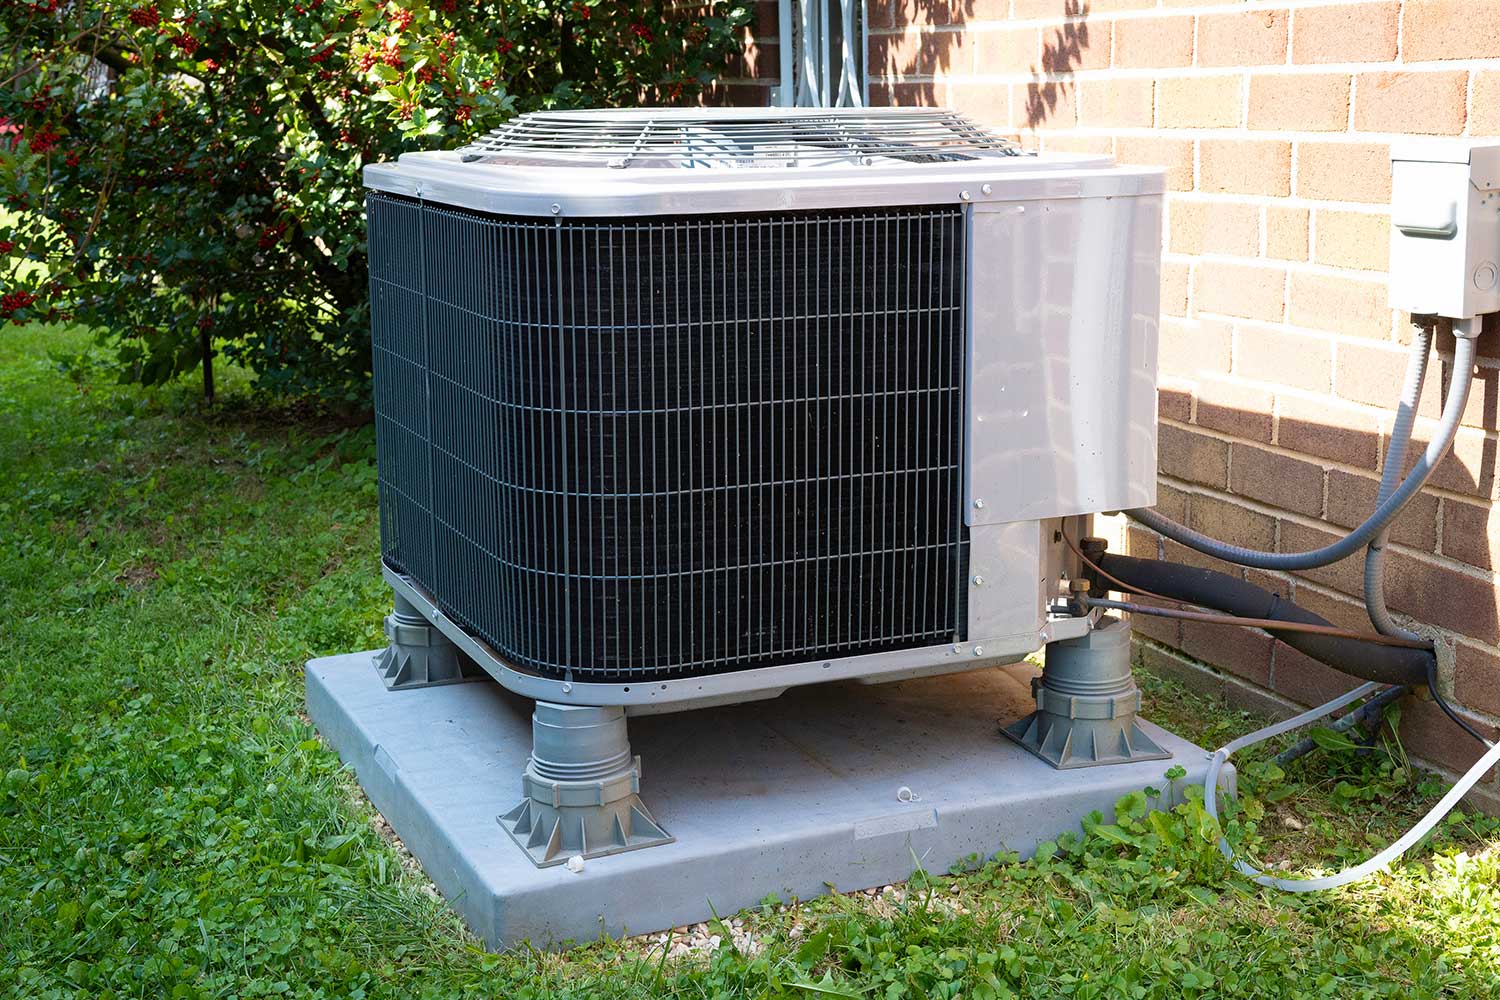 The many aspects of a cooling and heating provider